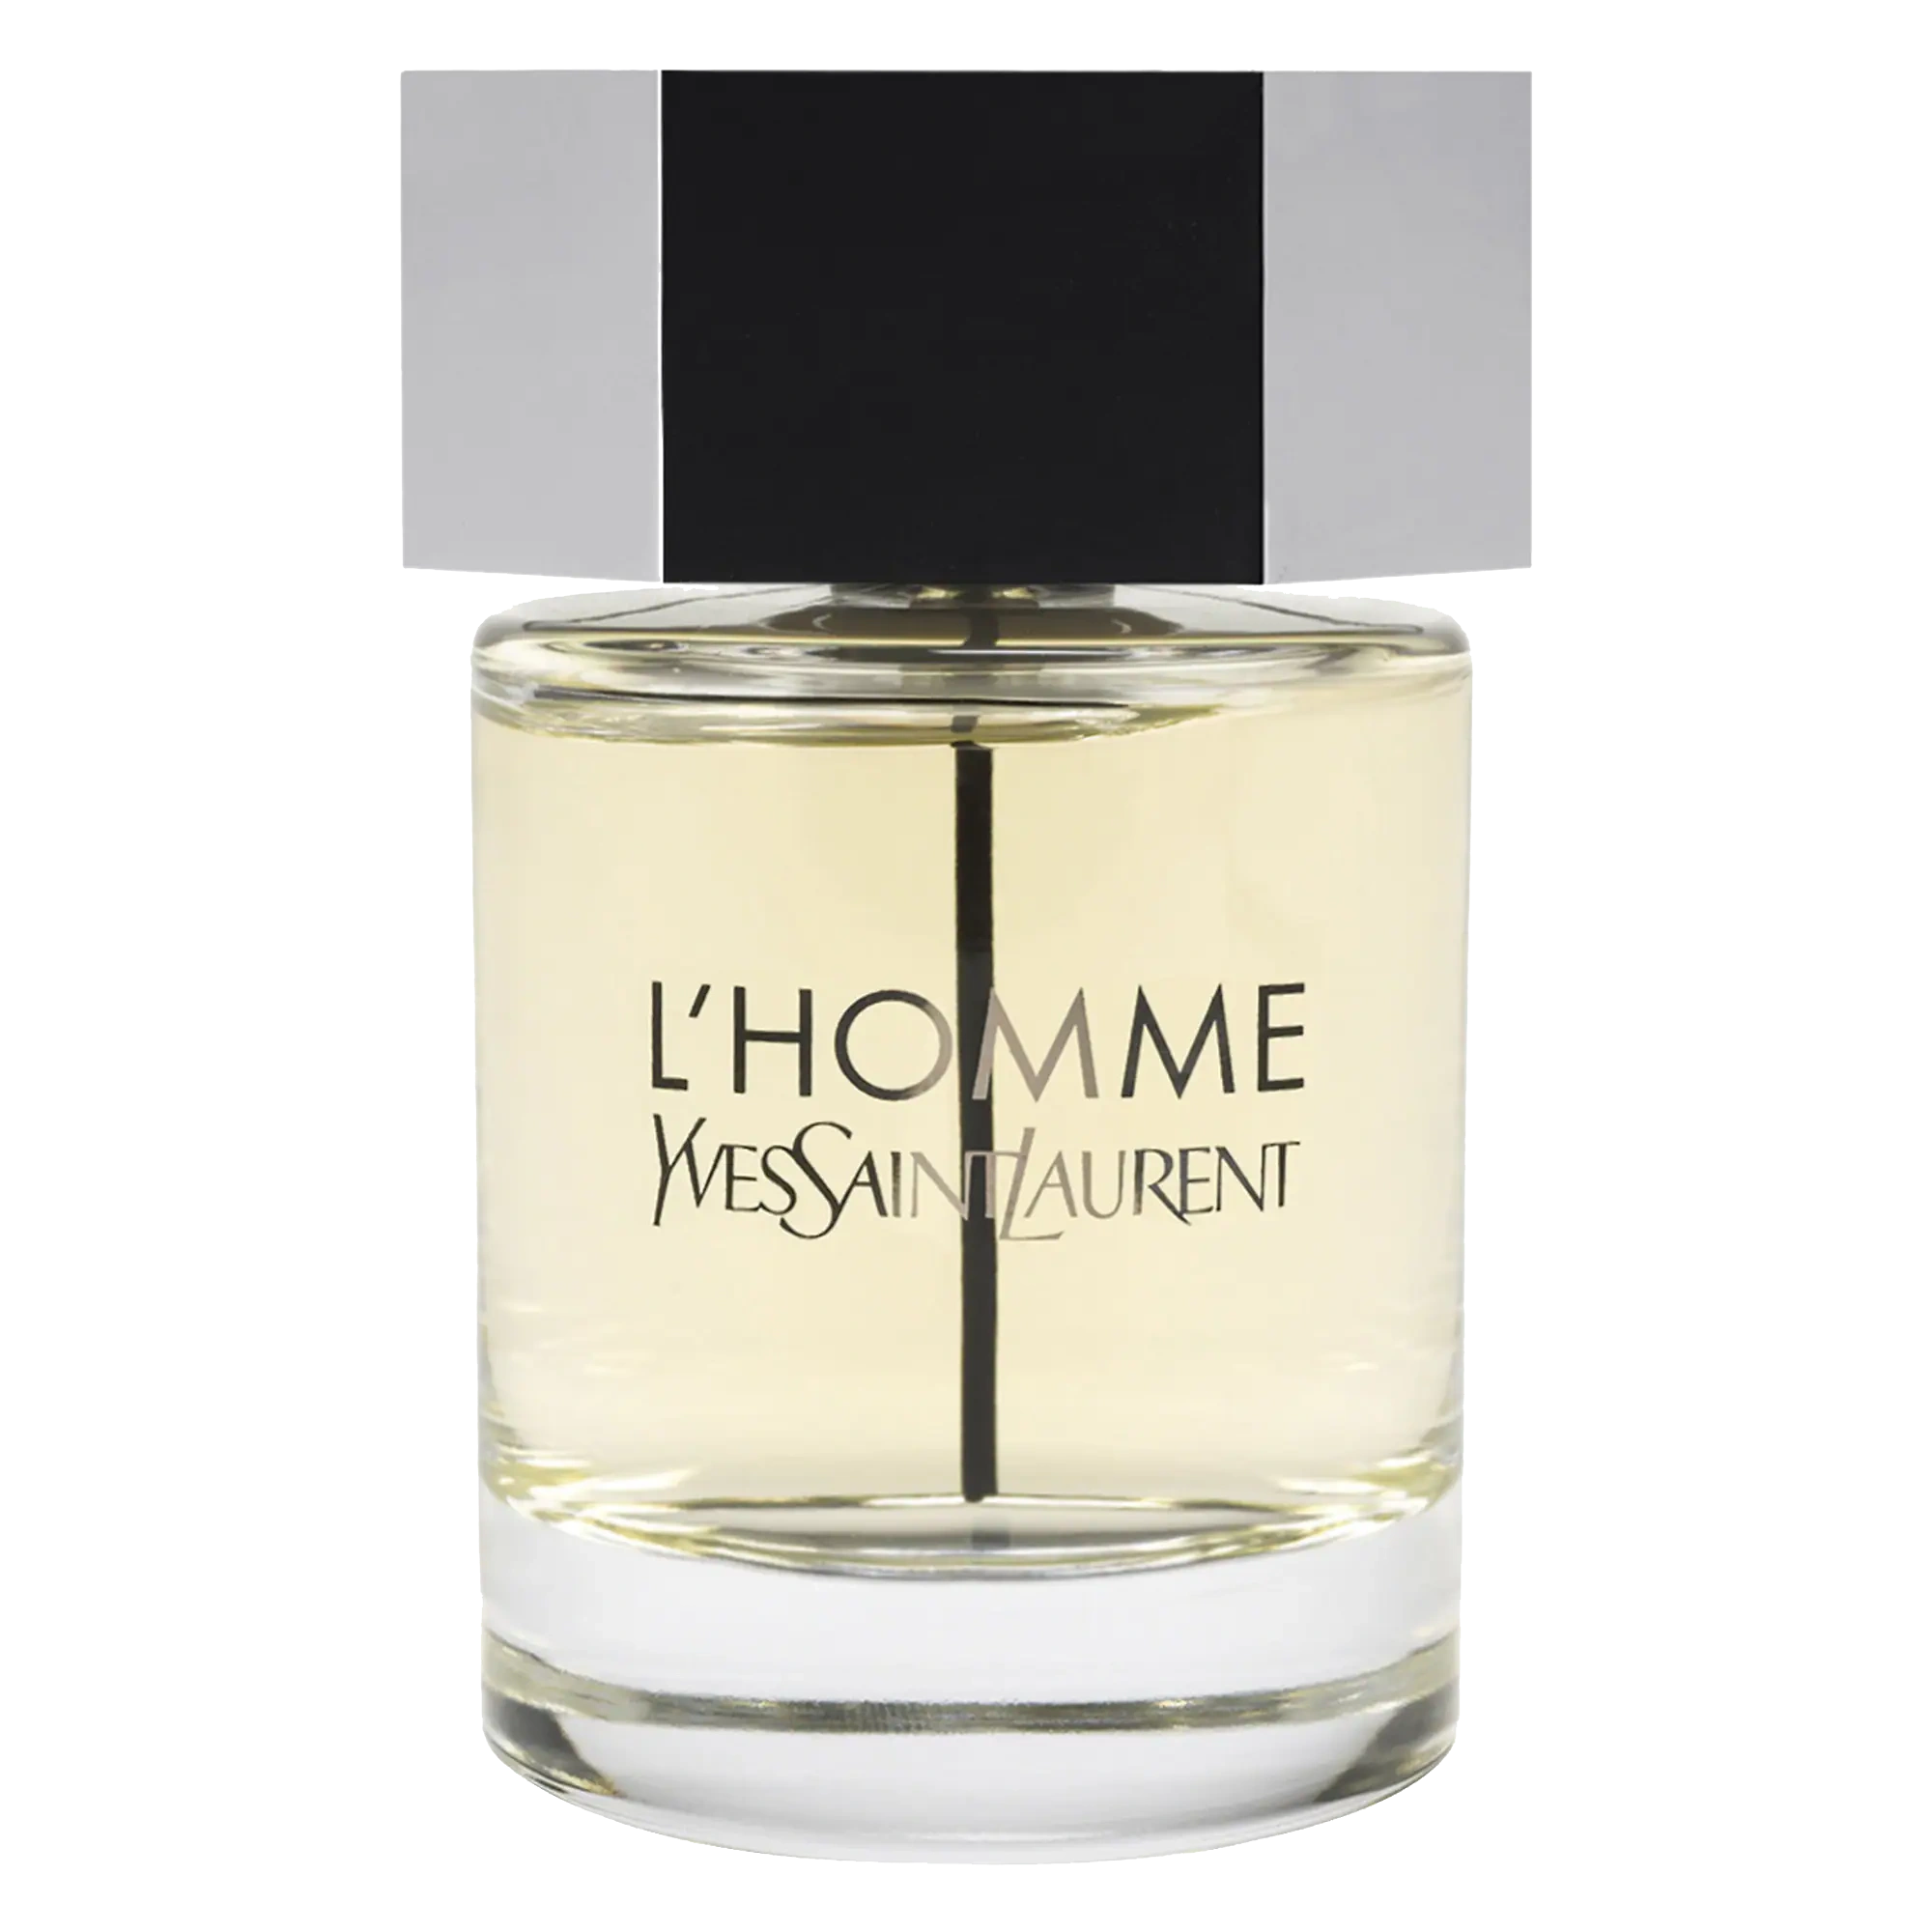 A luxurious glass bottle of L'Homme by Yves Saint Laurent on a minimalist backdrop, reflecting the perfume's timeless appeal.